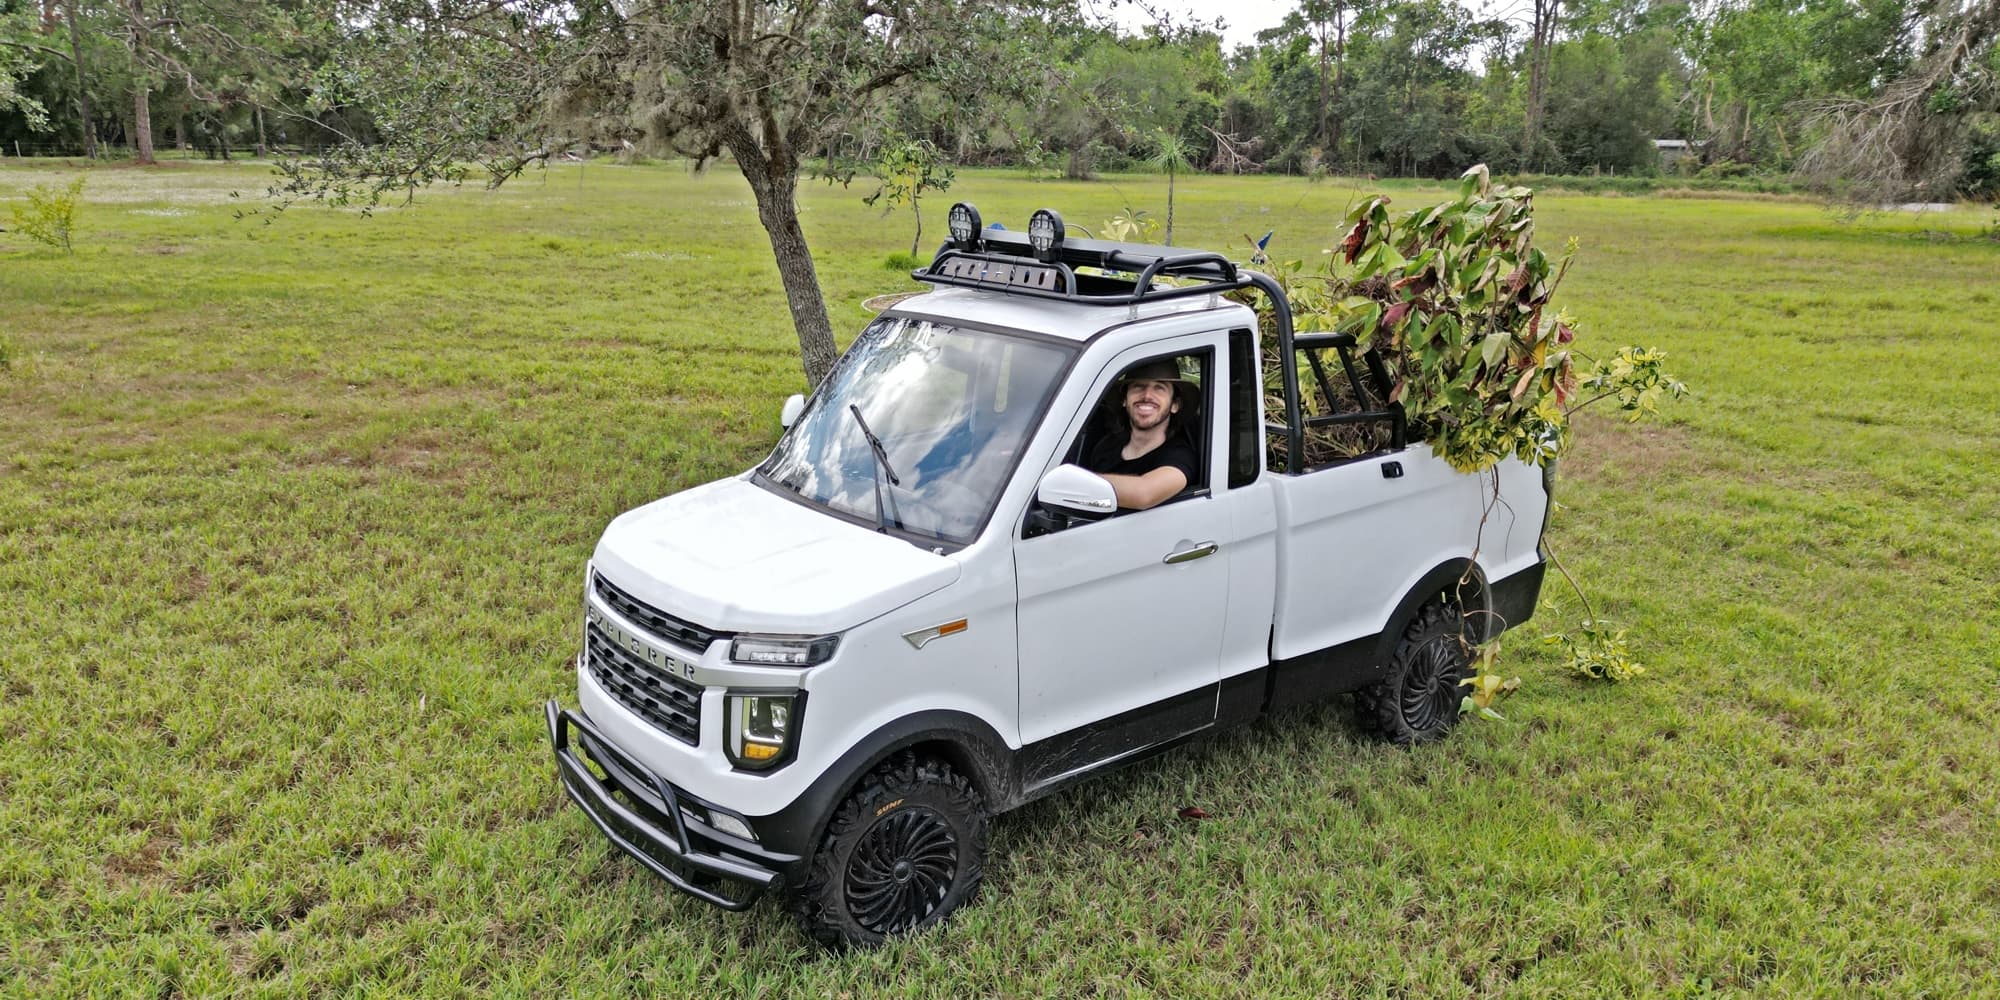 This Chinese electric mini-truck can haul more than a Ford F-150